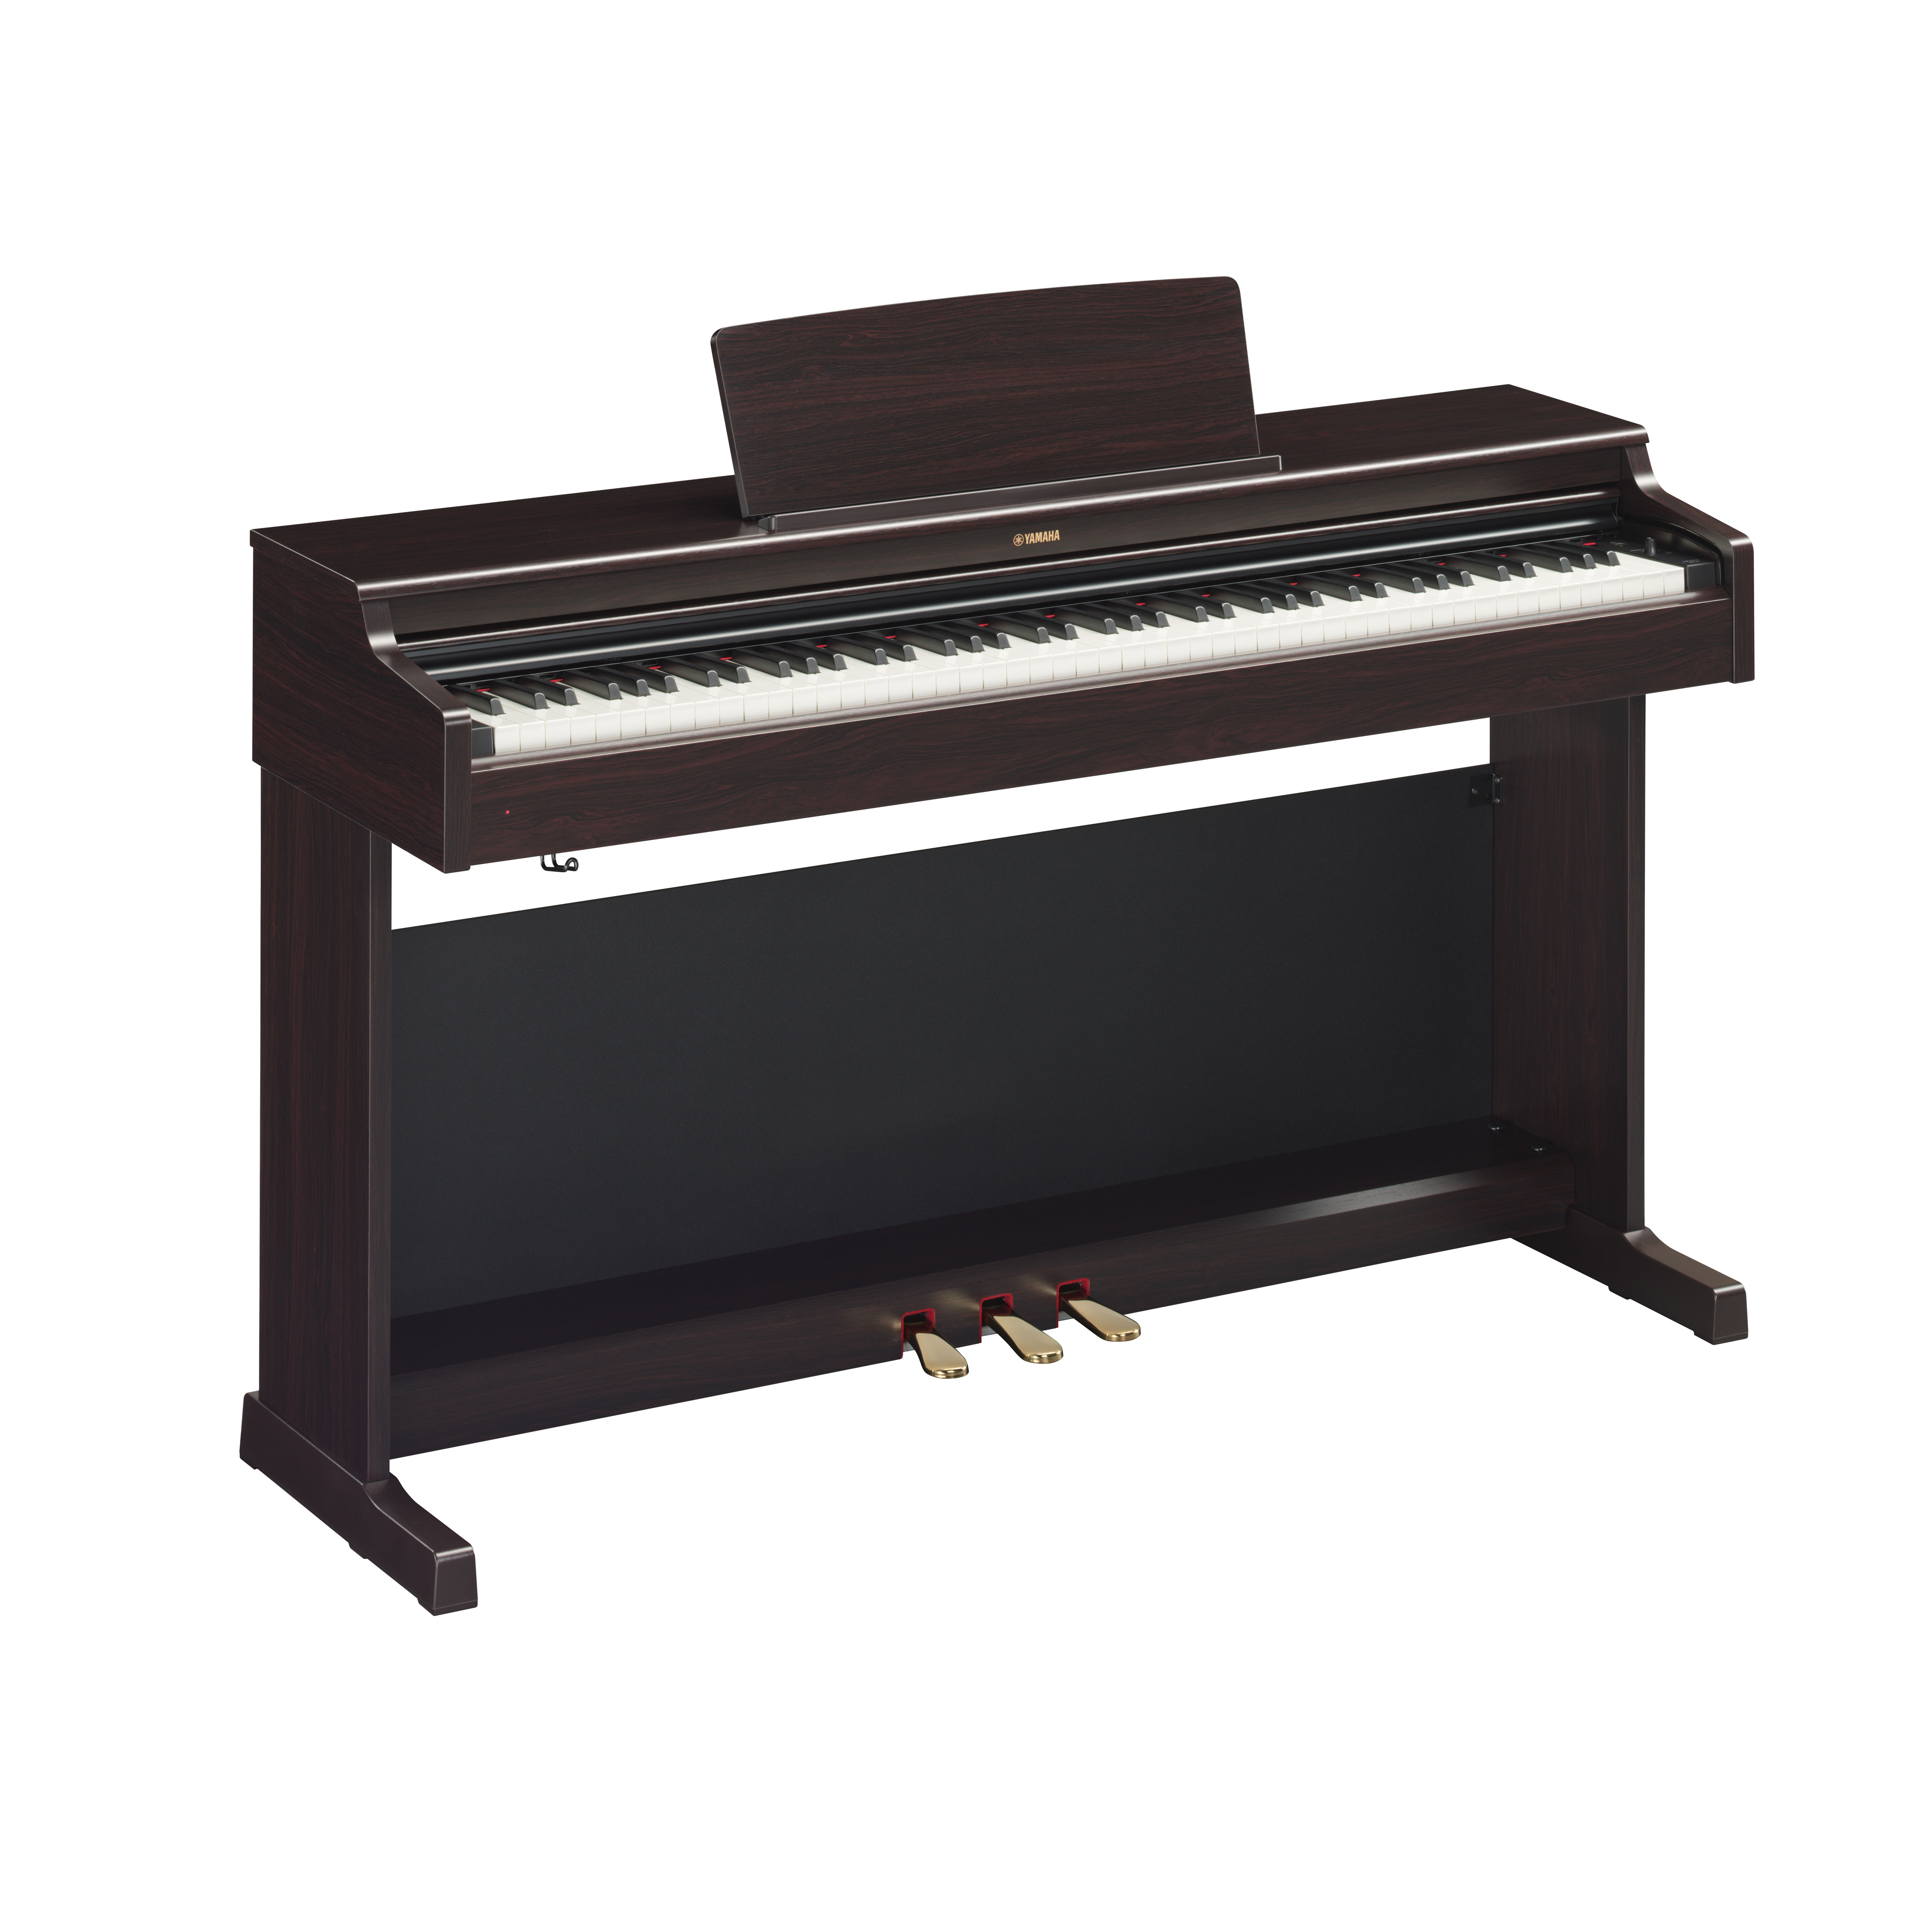 YDP-164 - Overview - ARIUS - Pianos - Musical Instruments